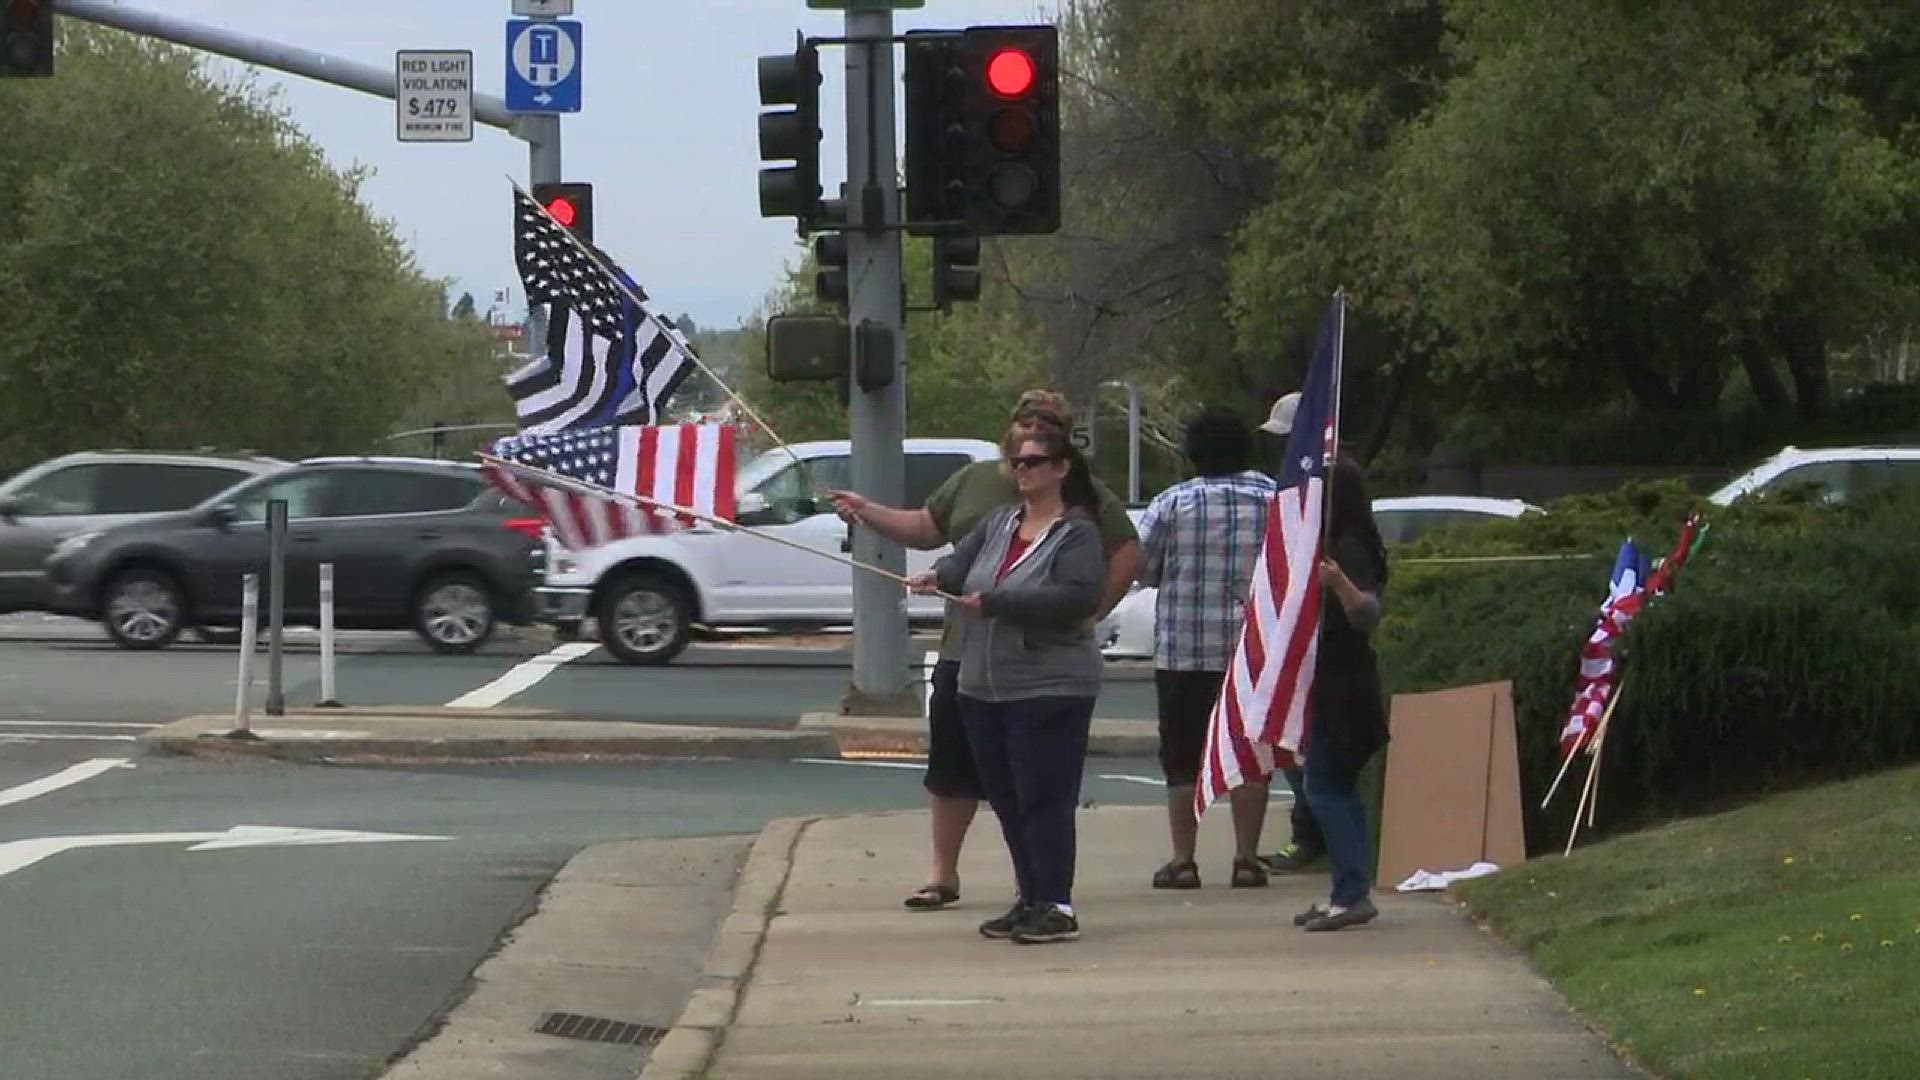 Protesters gathered in Roseville to advocate for free speech and the right to carry arms.